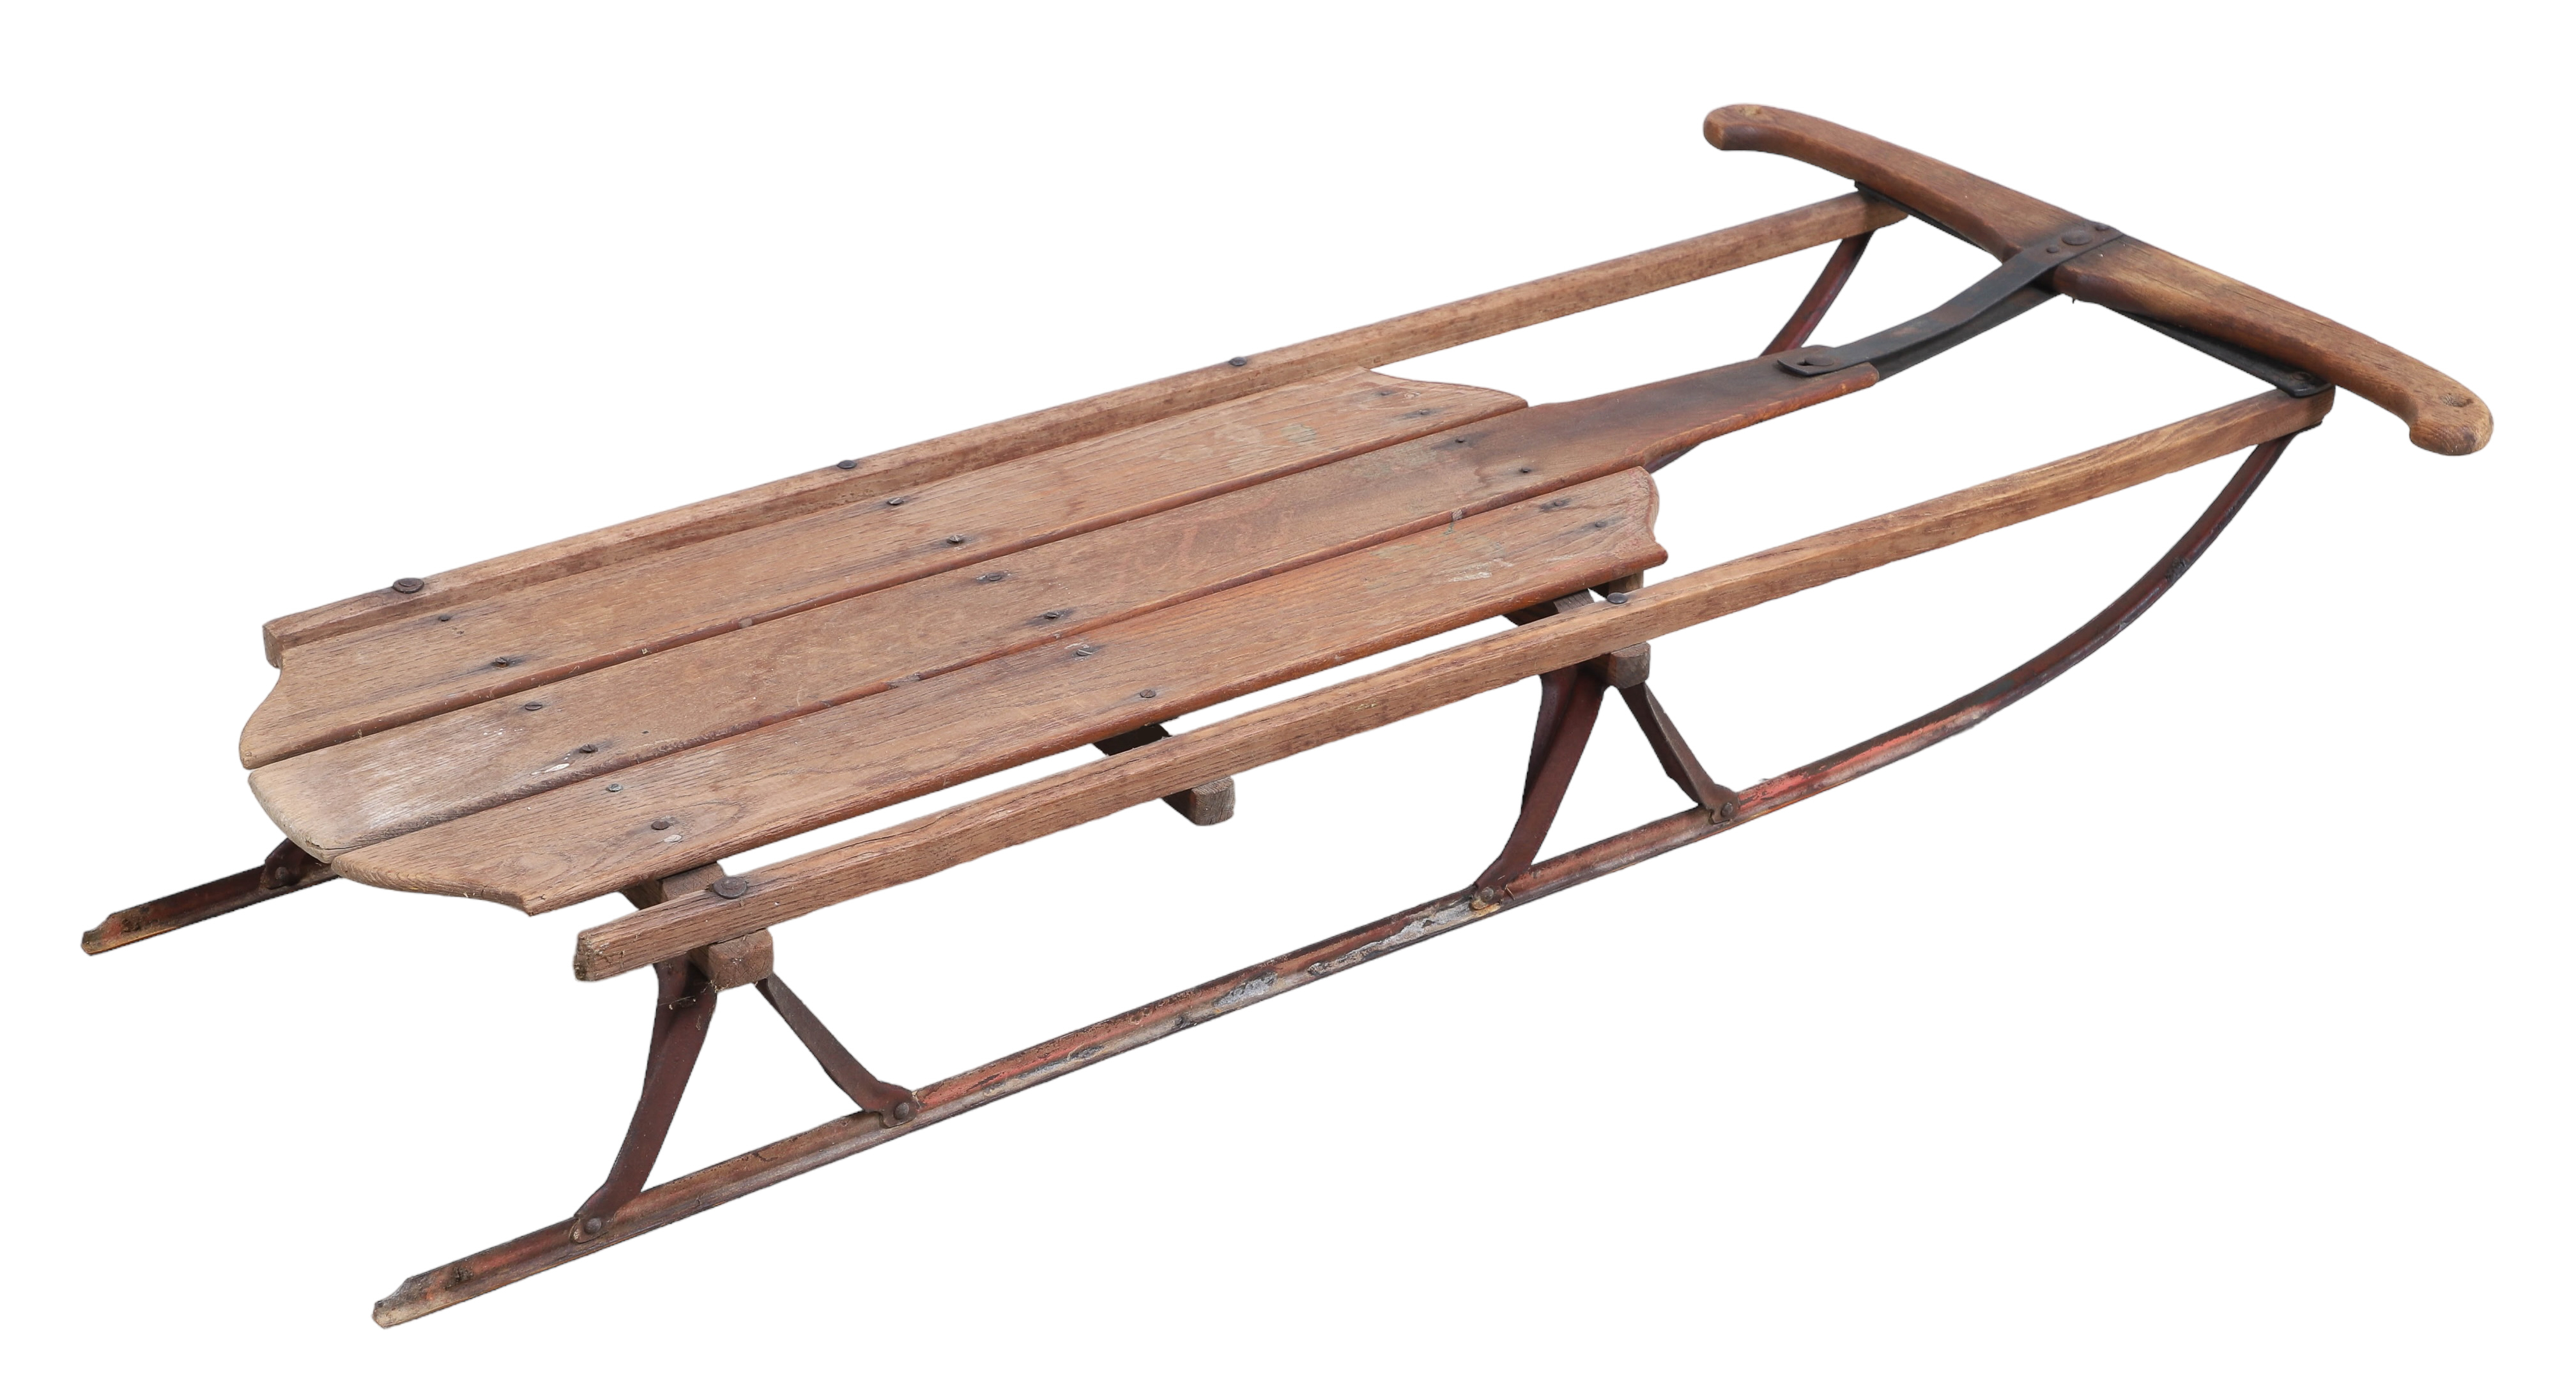 Vintage wooden sled, wrought iron